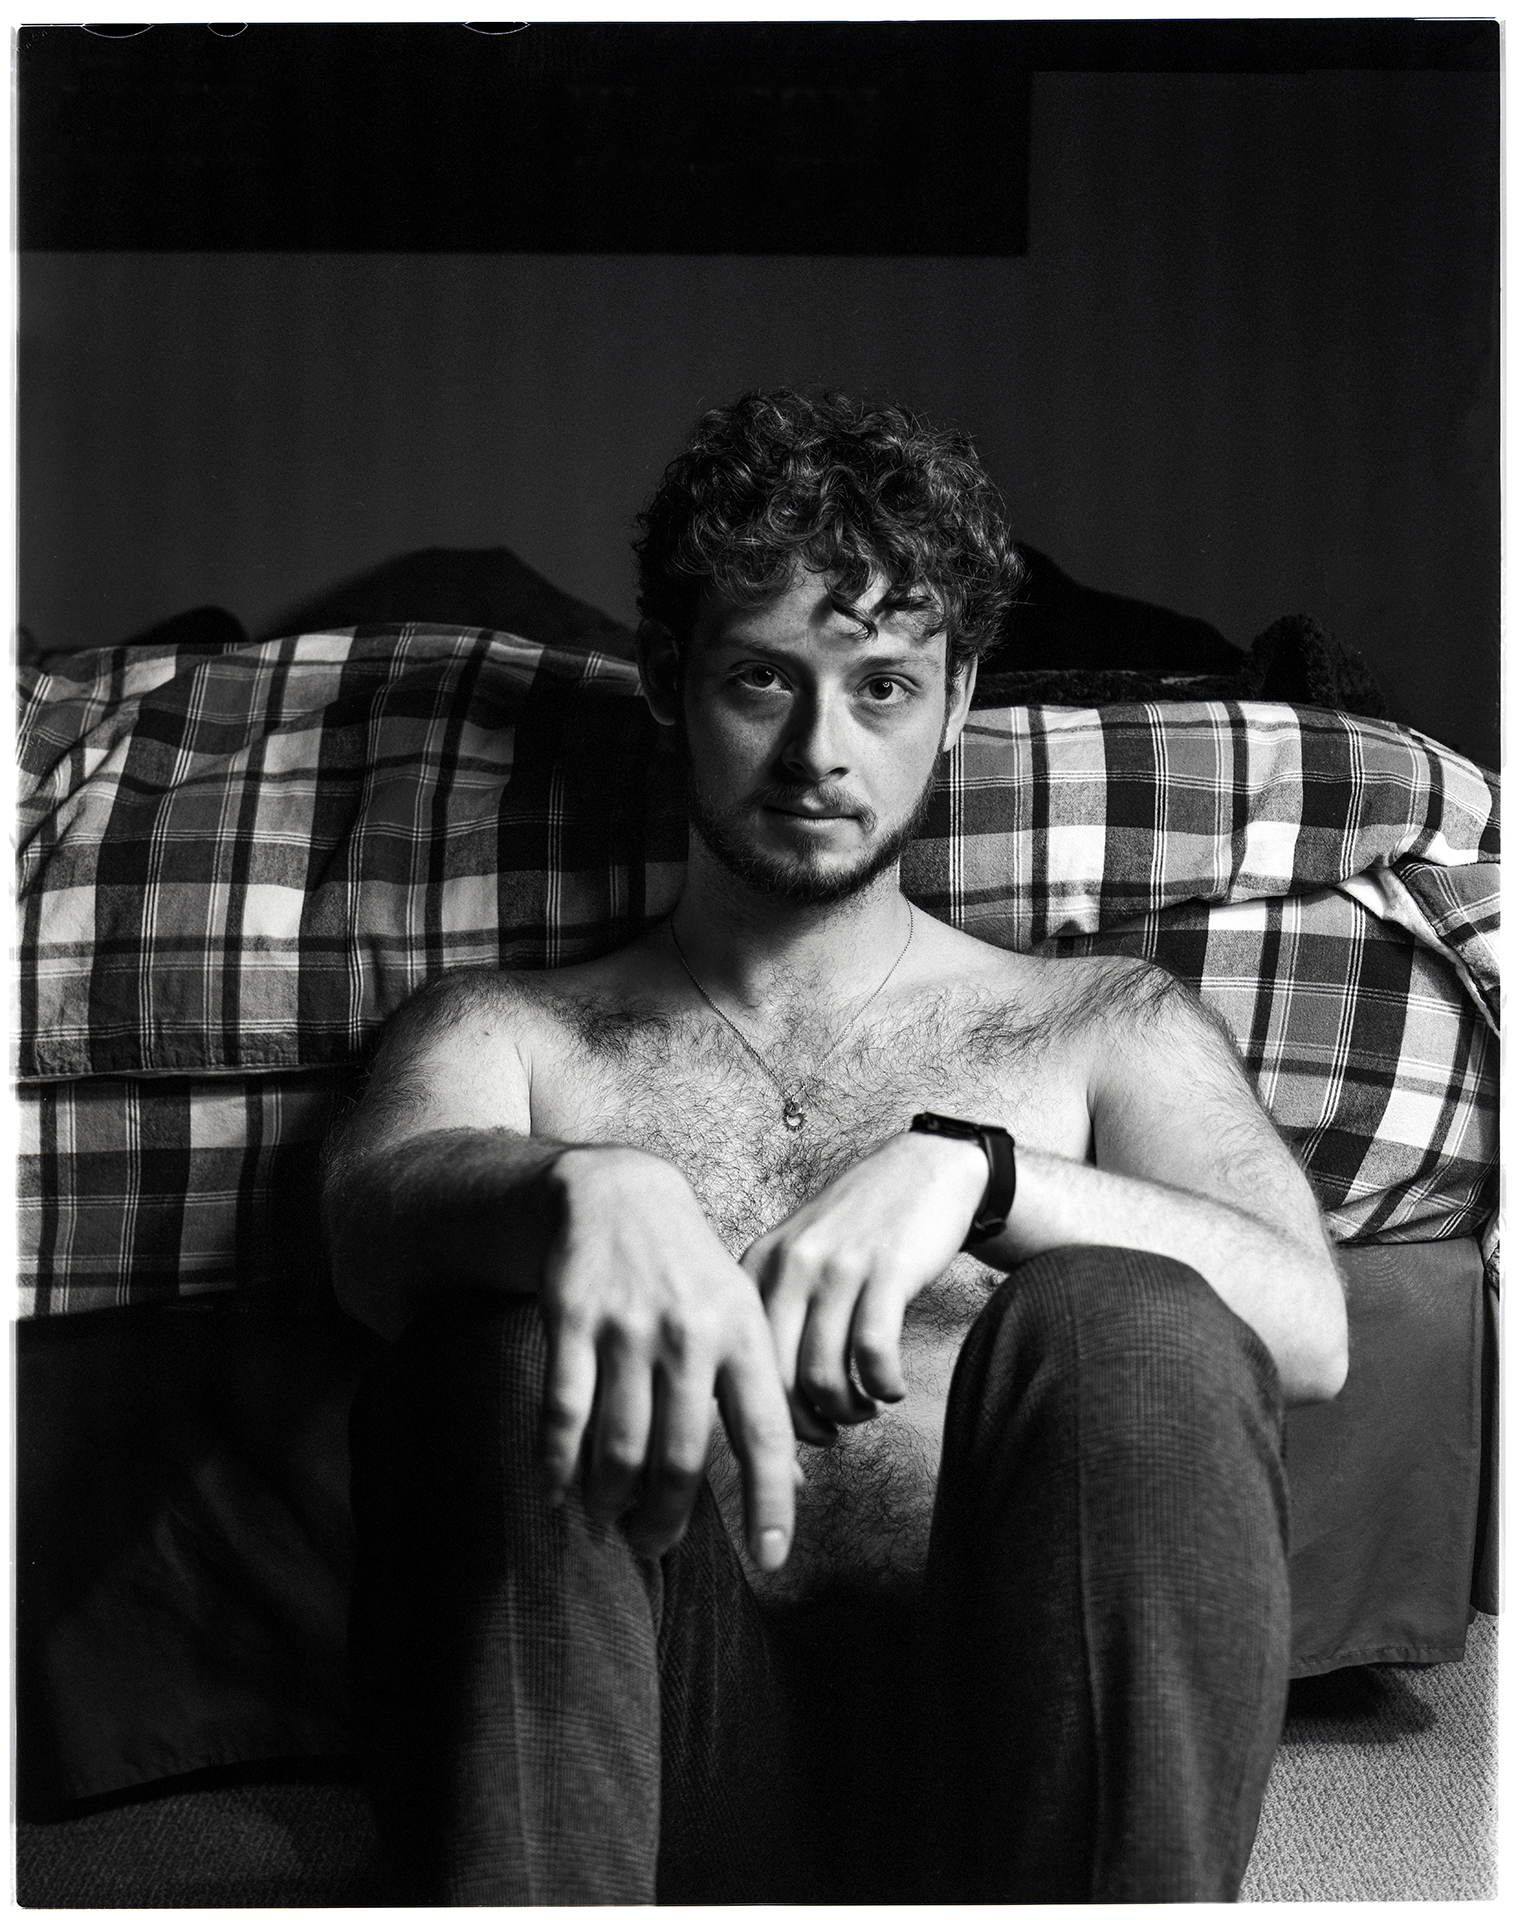 A black and white image shot on film depicting Jamie, a man in his early 20’s with a beard and short curly hair. Jamie is sitting shirtless on his bedroom floor wearing dark pants, directly in front of his bed. He is sitting with his knees together and his arms crossed while looking into the camera.